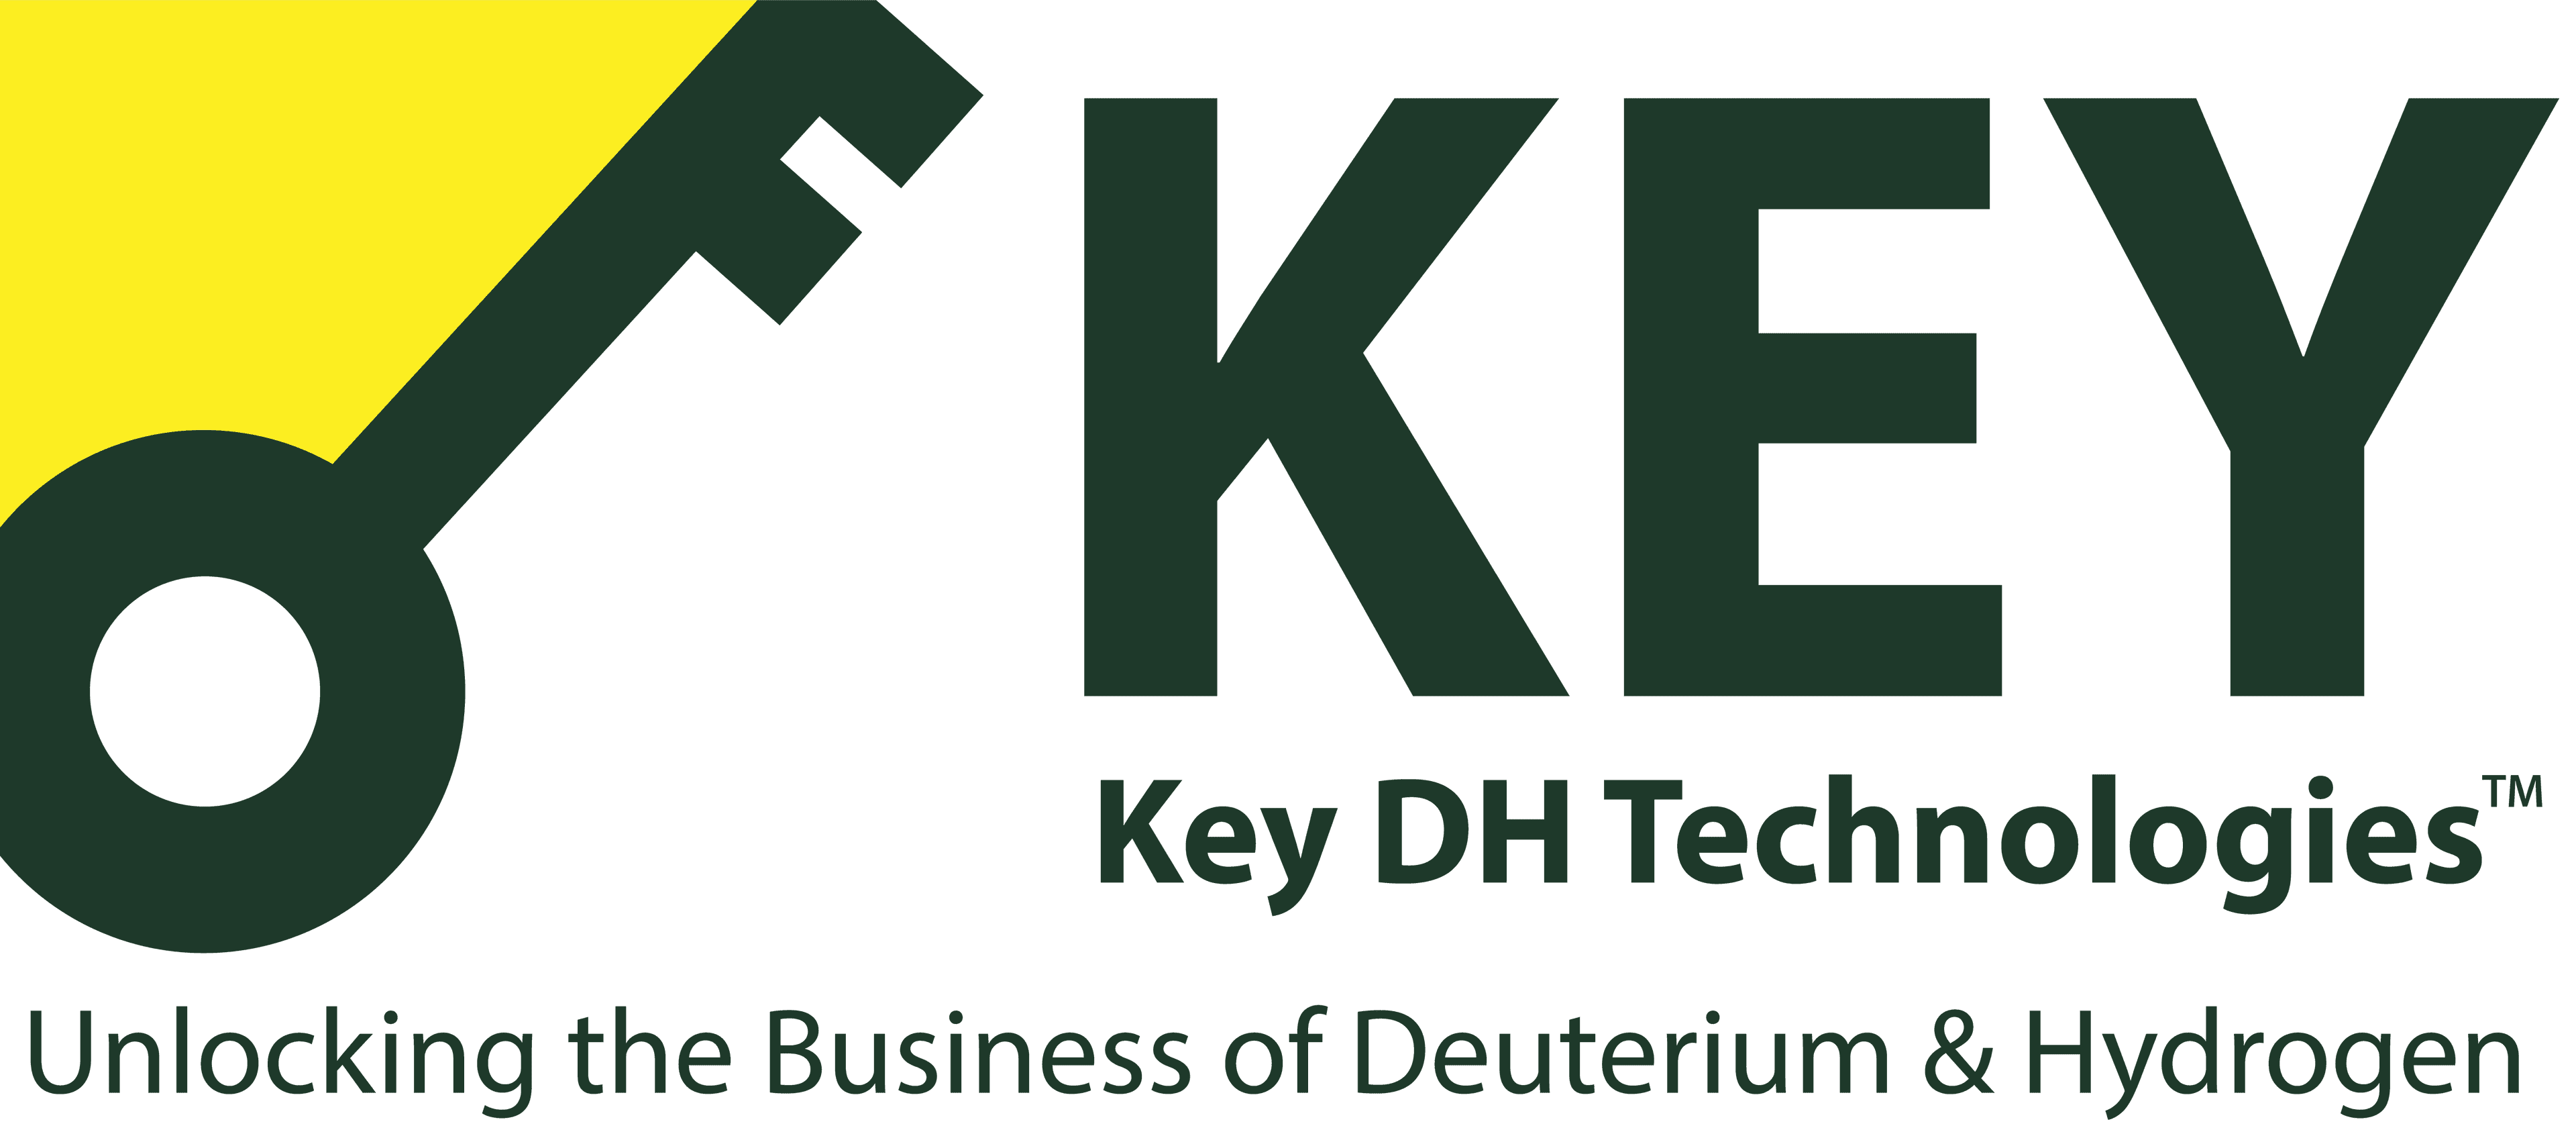 Product SDTC Grant to KEY DH Technologies Enables $12 Million Green Hydrogen Technology Demonstration - Key DH Technologies Inc., image